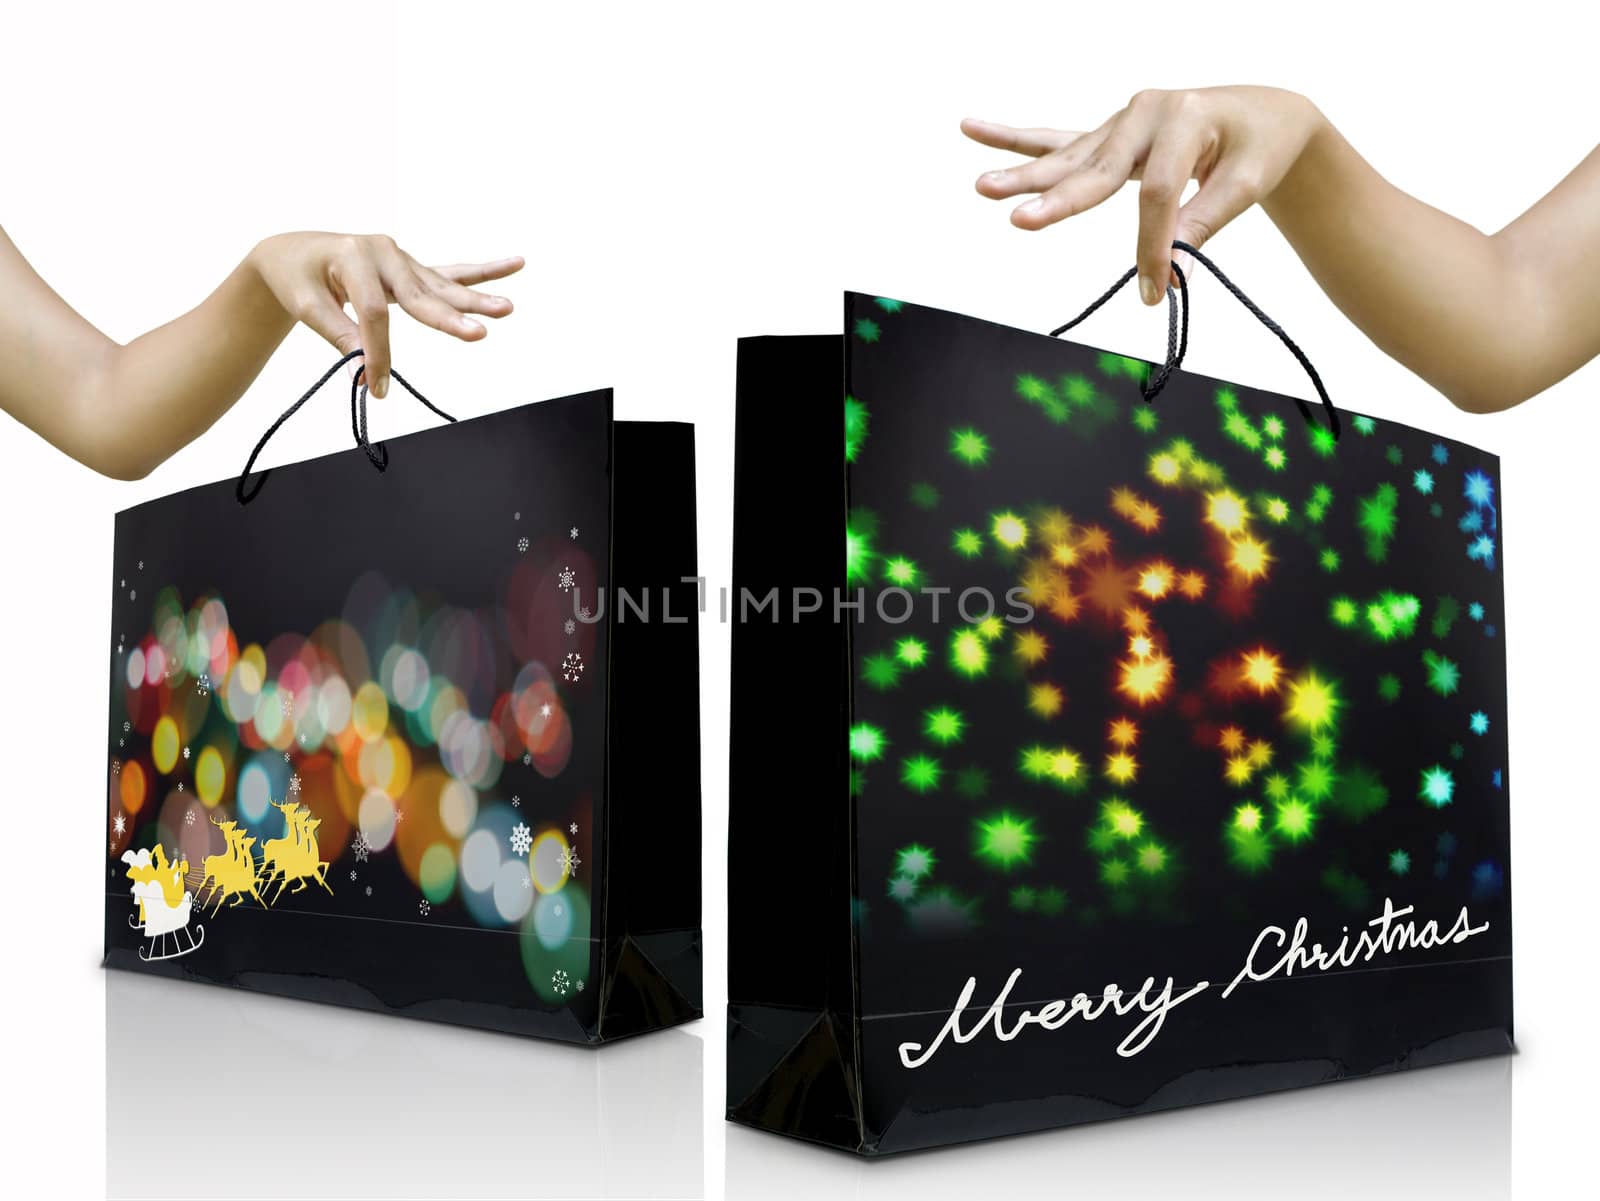 Shopping bag in holiday event by pixbox77